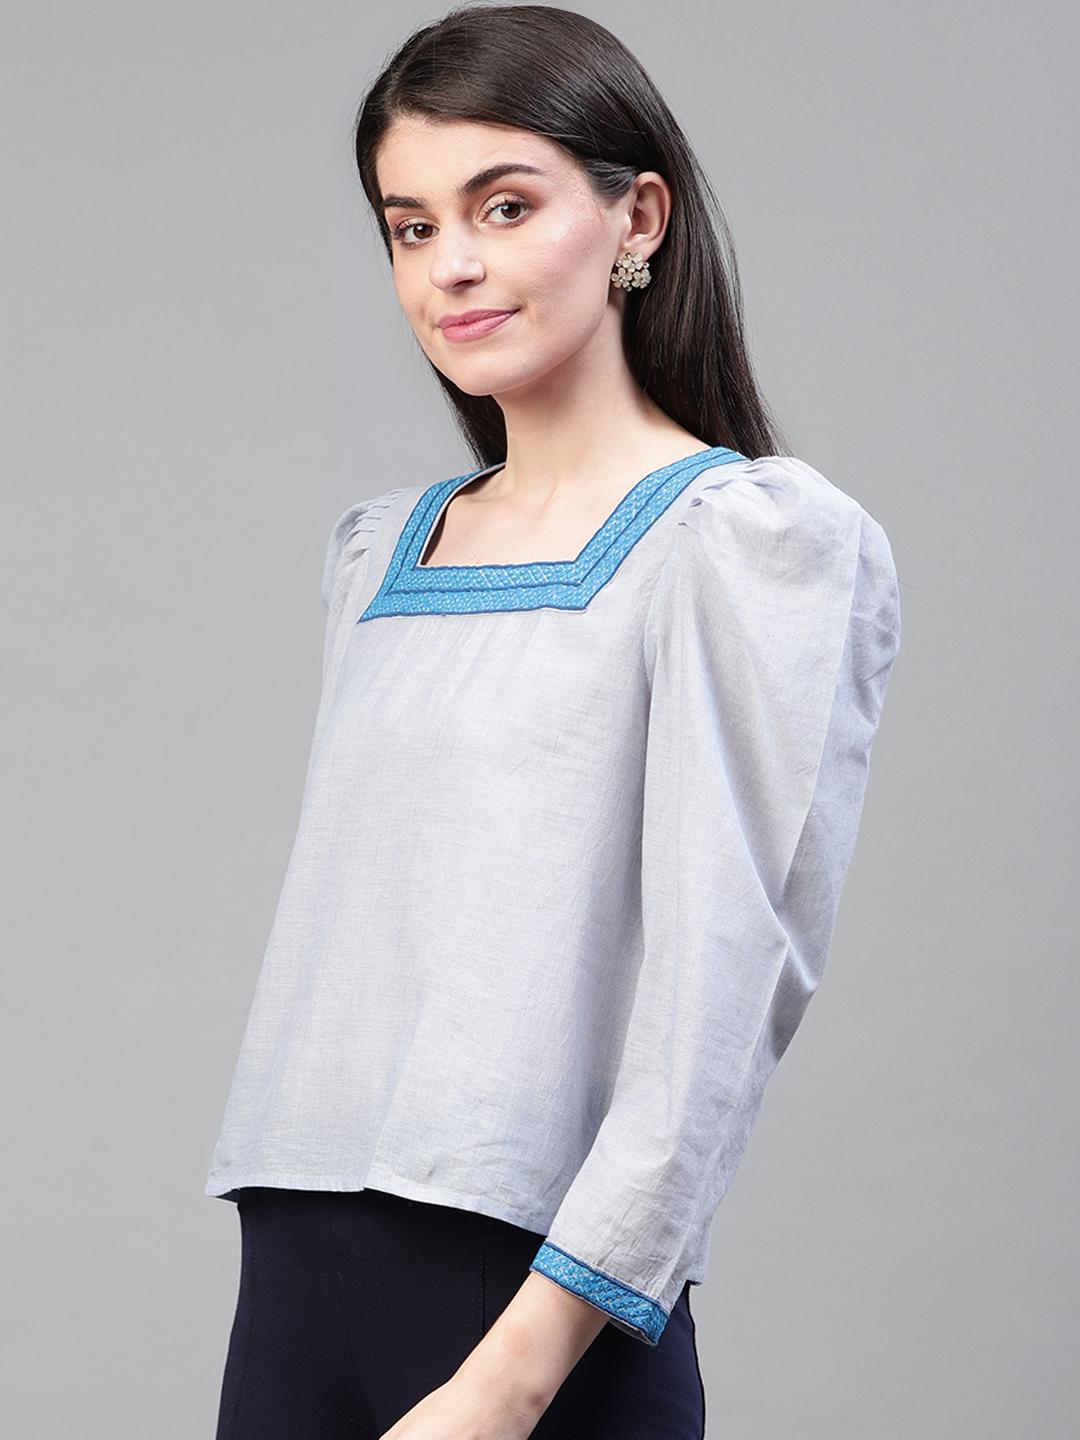 Blue cotton embroidered top